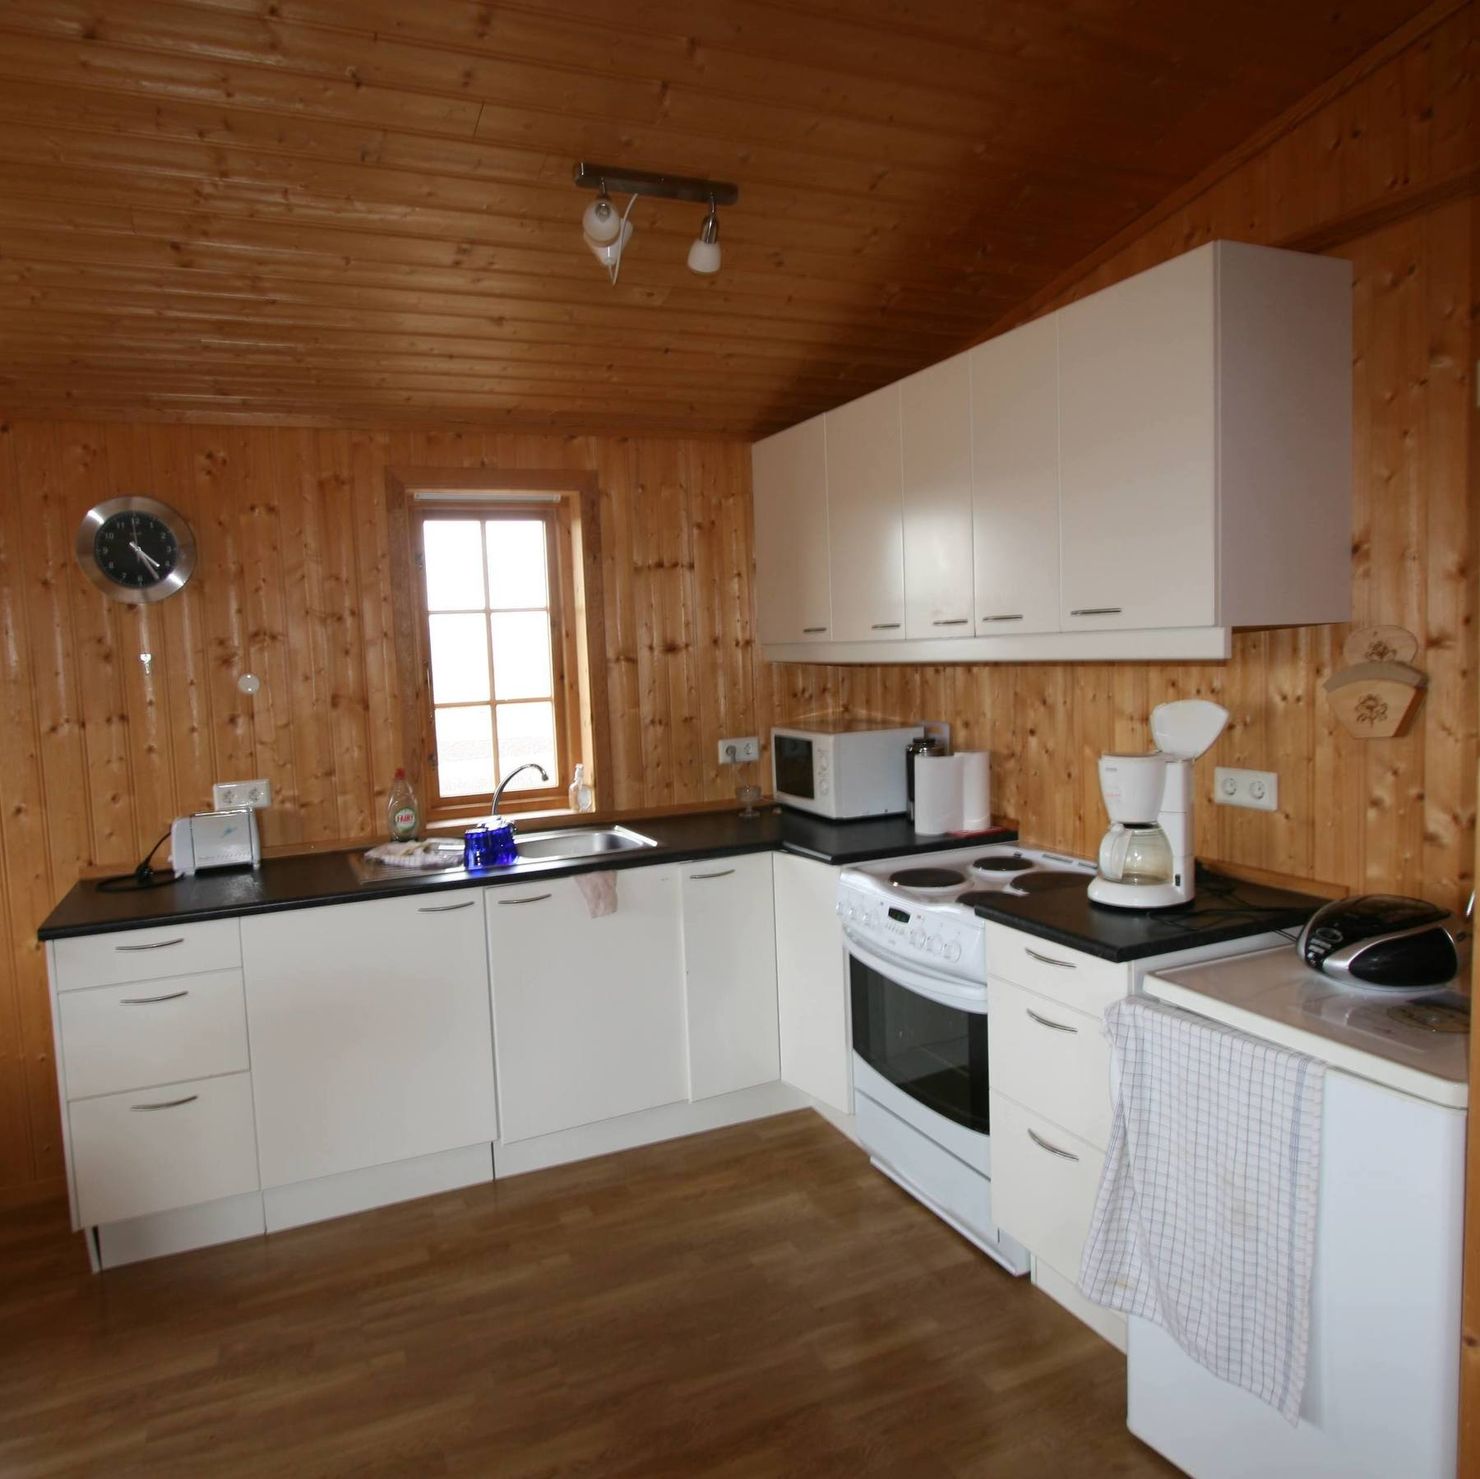 Large kitchen with toaster, refrigerator and cooker